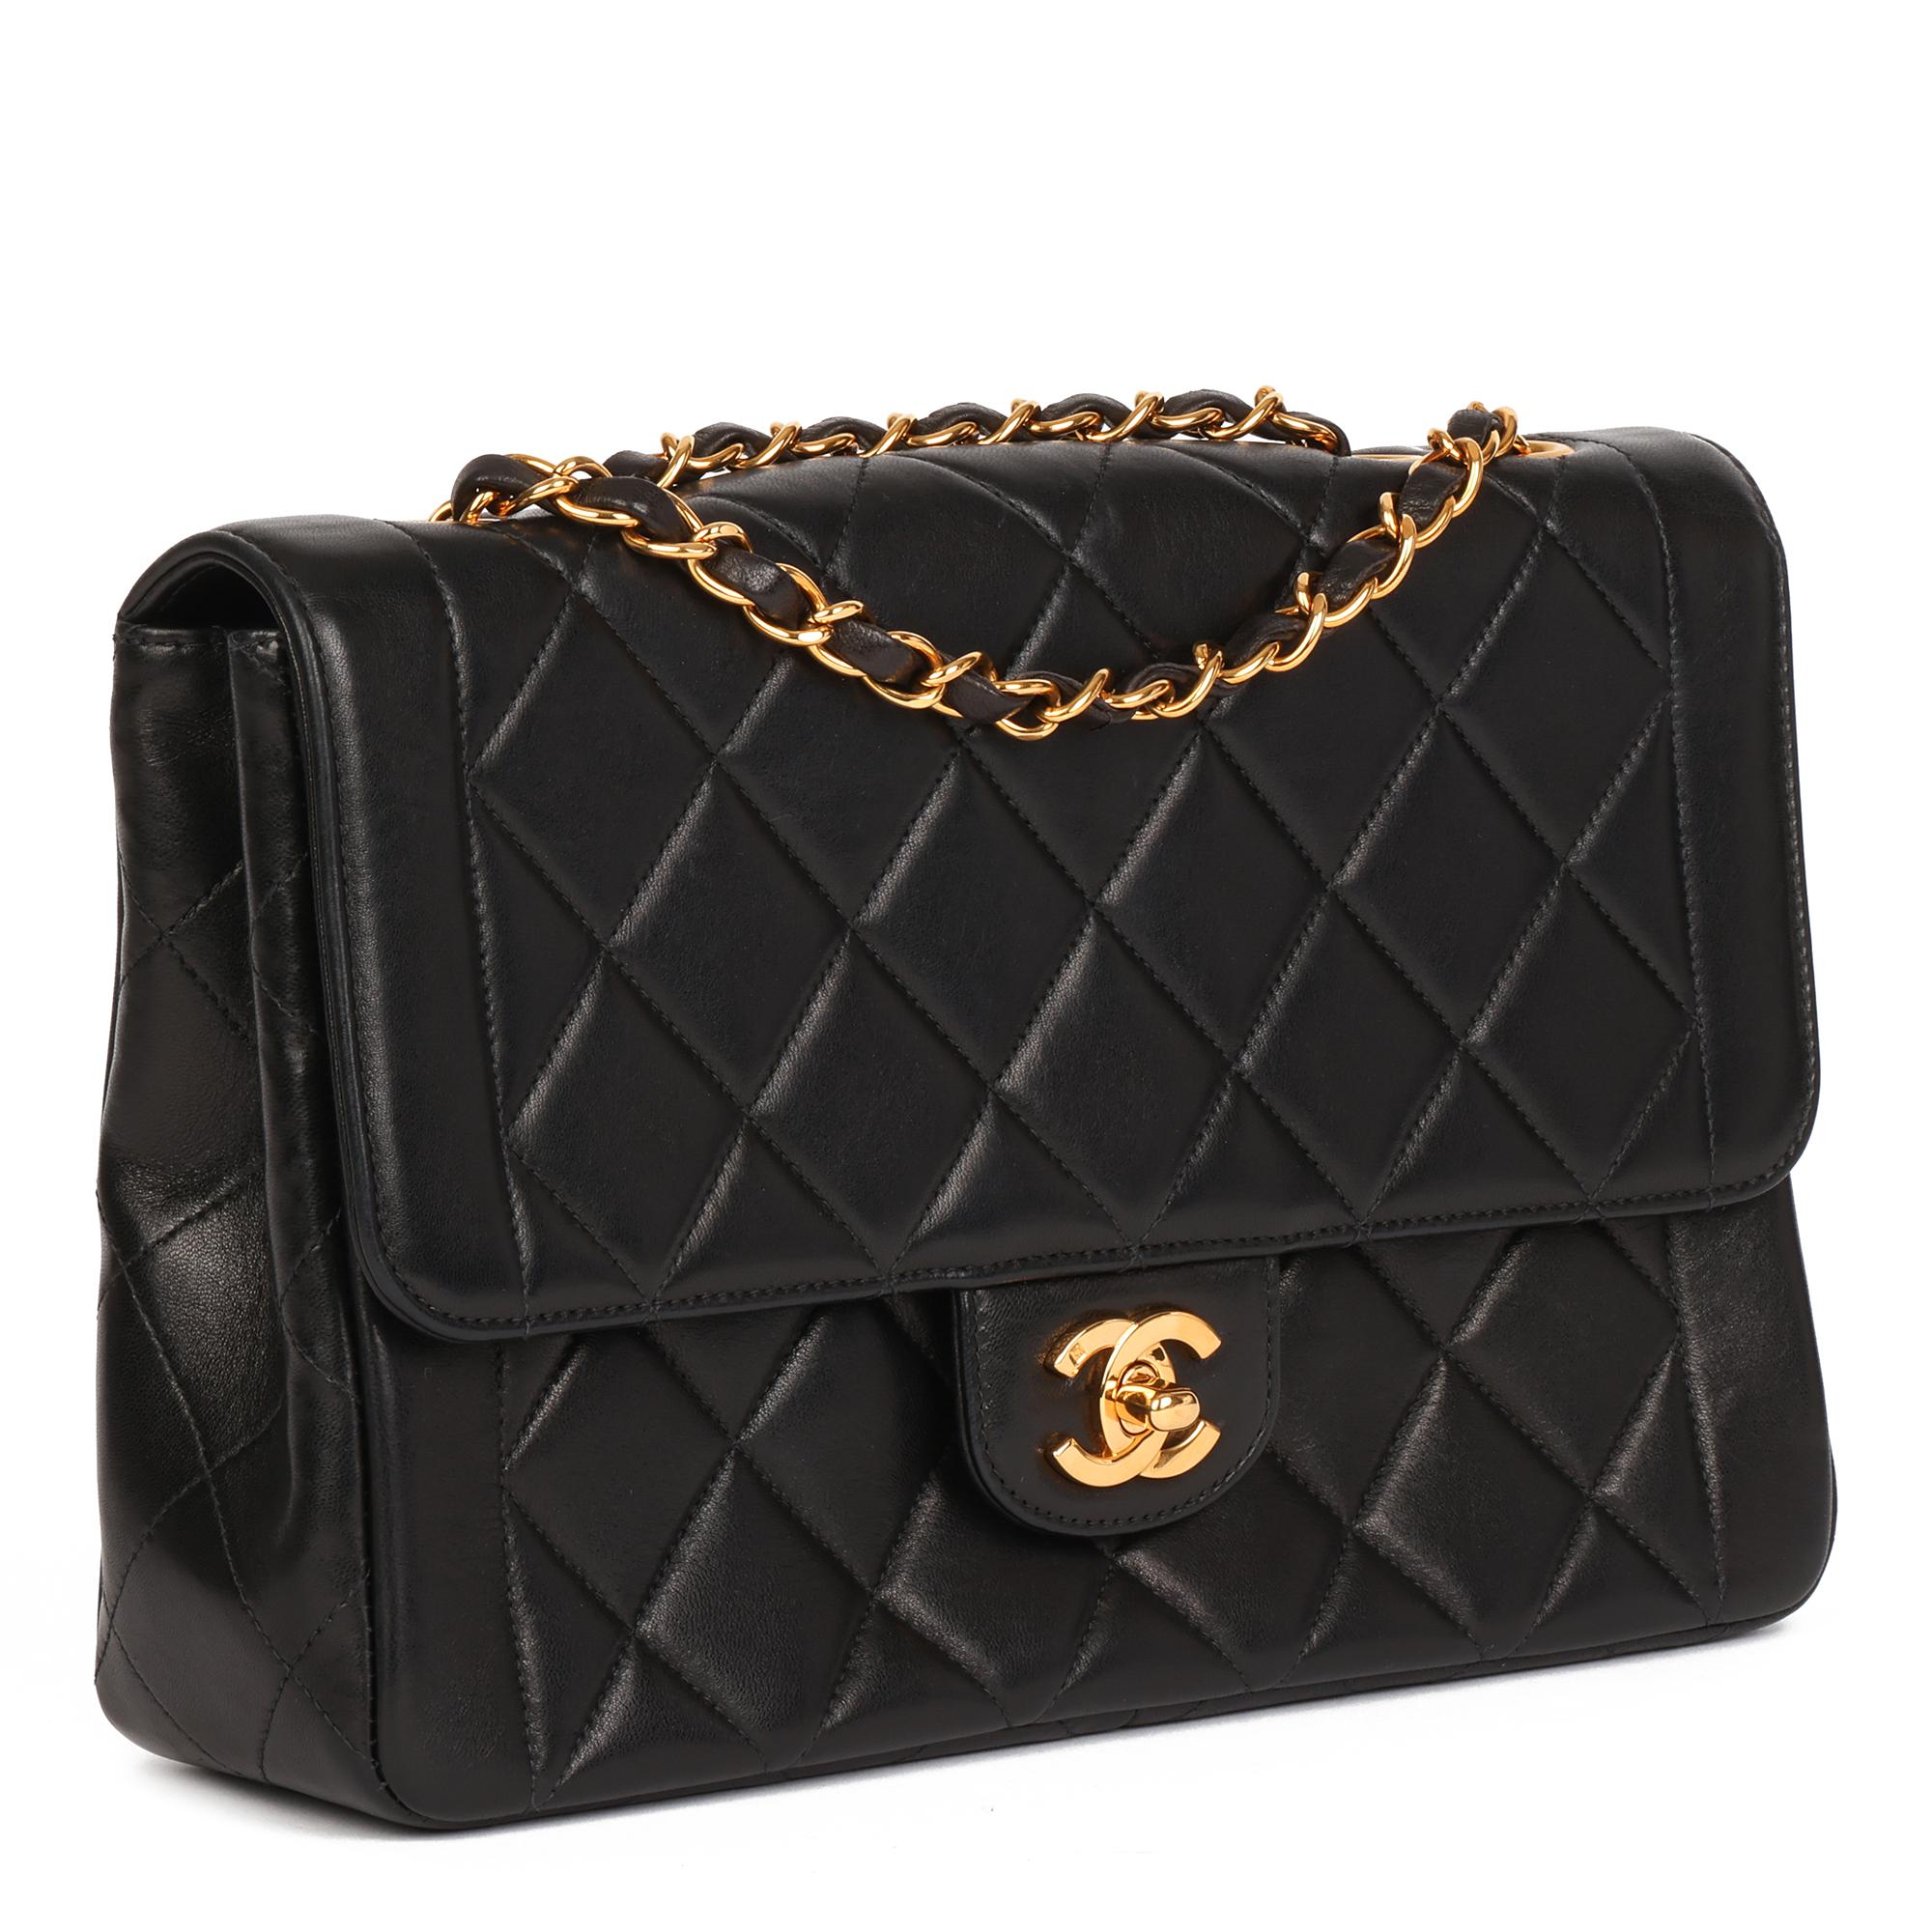 CHANEL
Black Quilted Lambskin Vintage Classic Single Flap Bag 

Xupes Reference: HB4043
Serial Number: 4595158
Age (Circa): 1997
Accompanied By: Chanel Dust Bag 
Authenticity Details: Serial Sticker (Made in France) 
Gender: Ladies
Type: Shoulder,